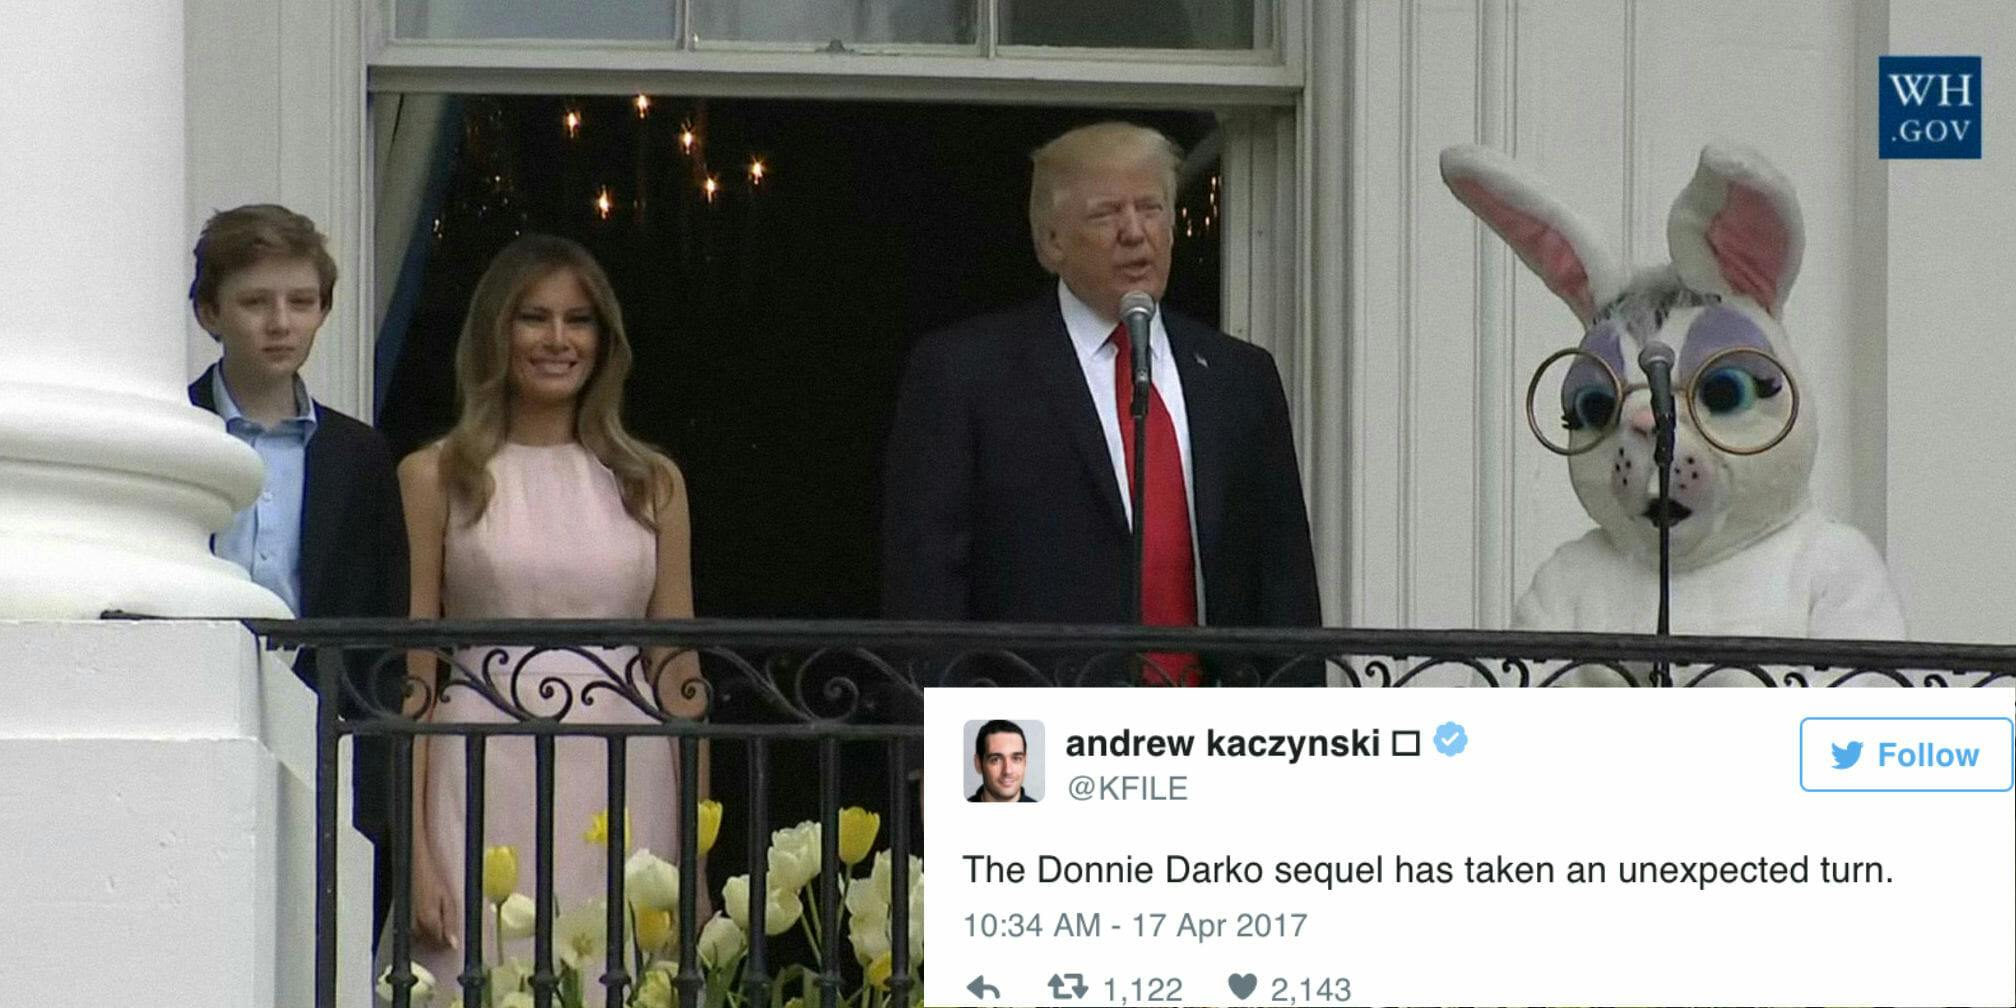 Donald Trump and His Easter Bunny Became a Meme the Moment They Appeared